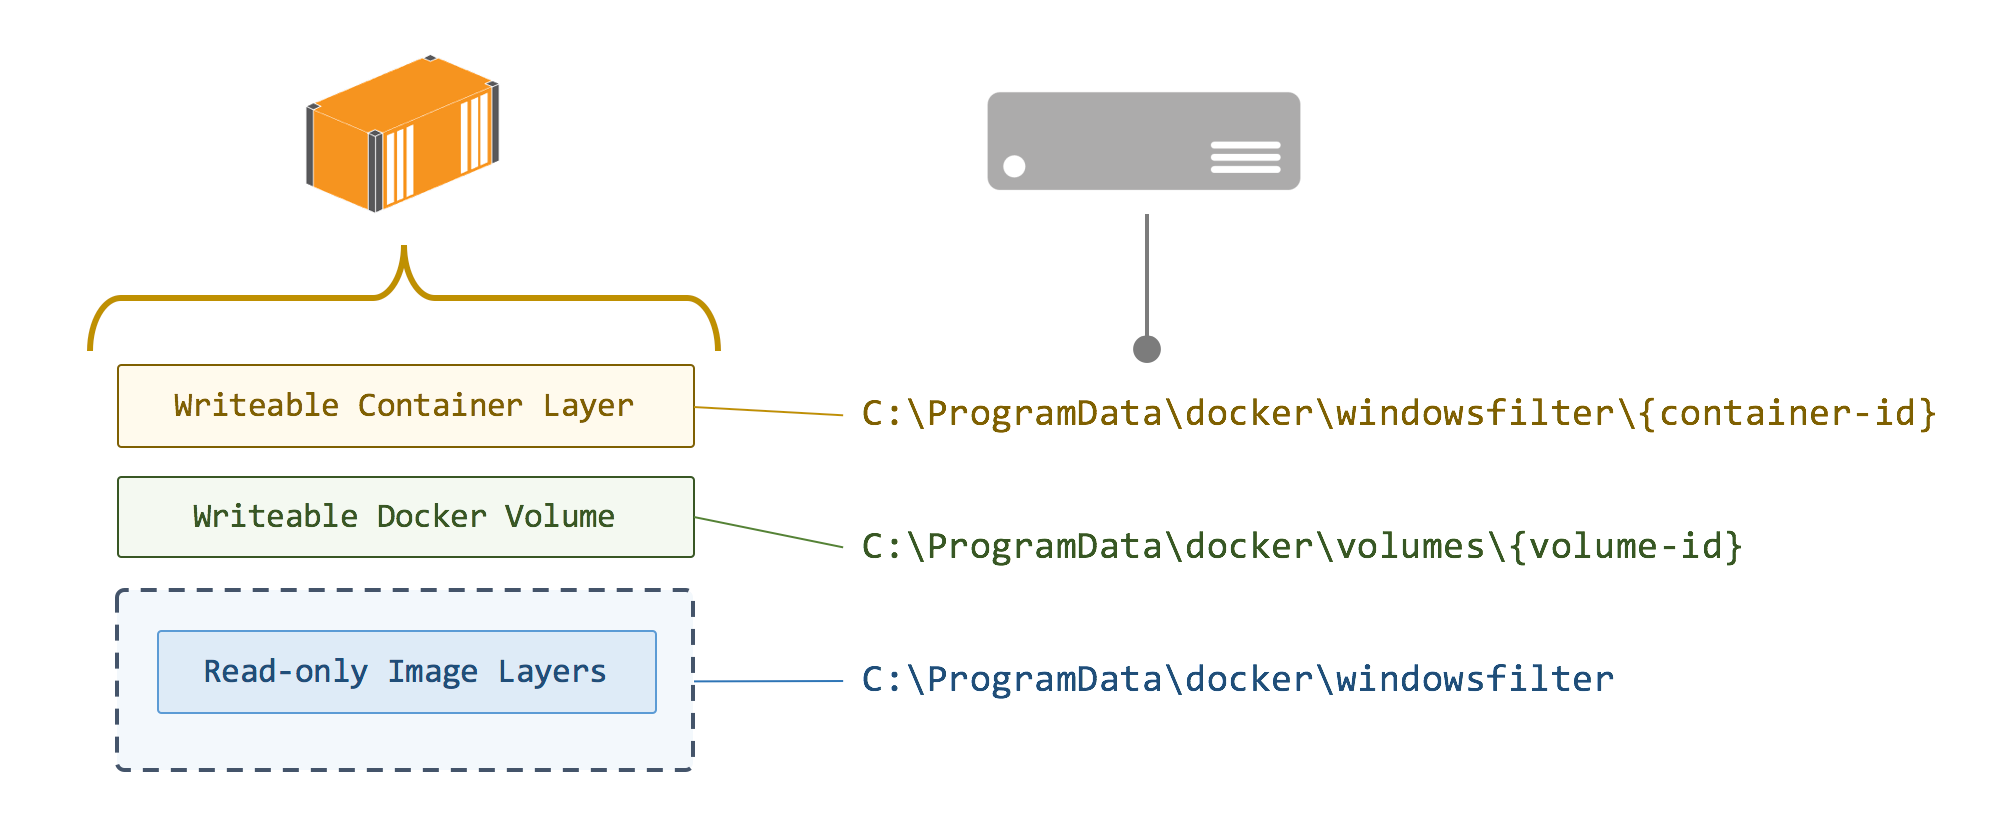 Container storage with Docker volumes